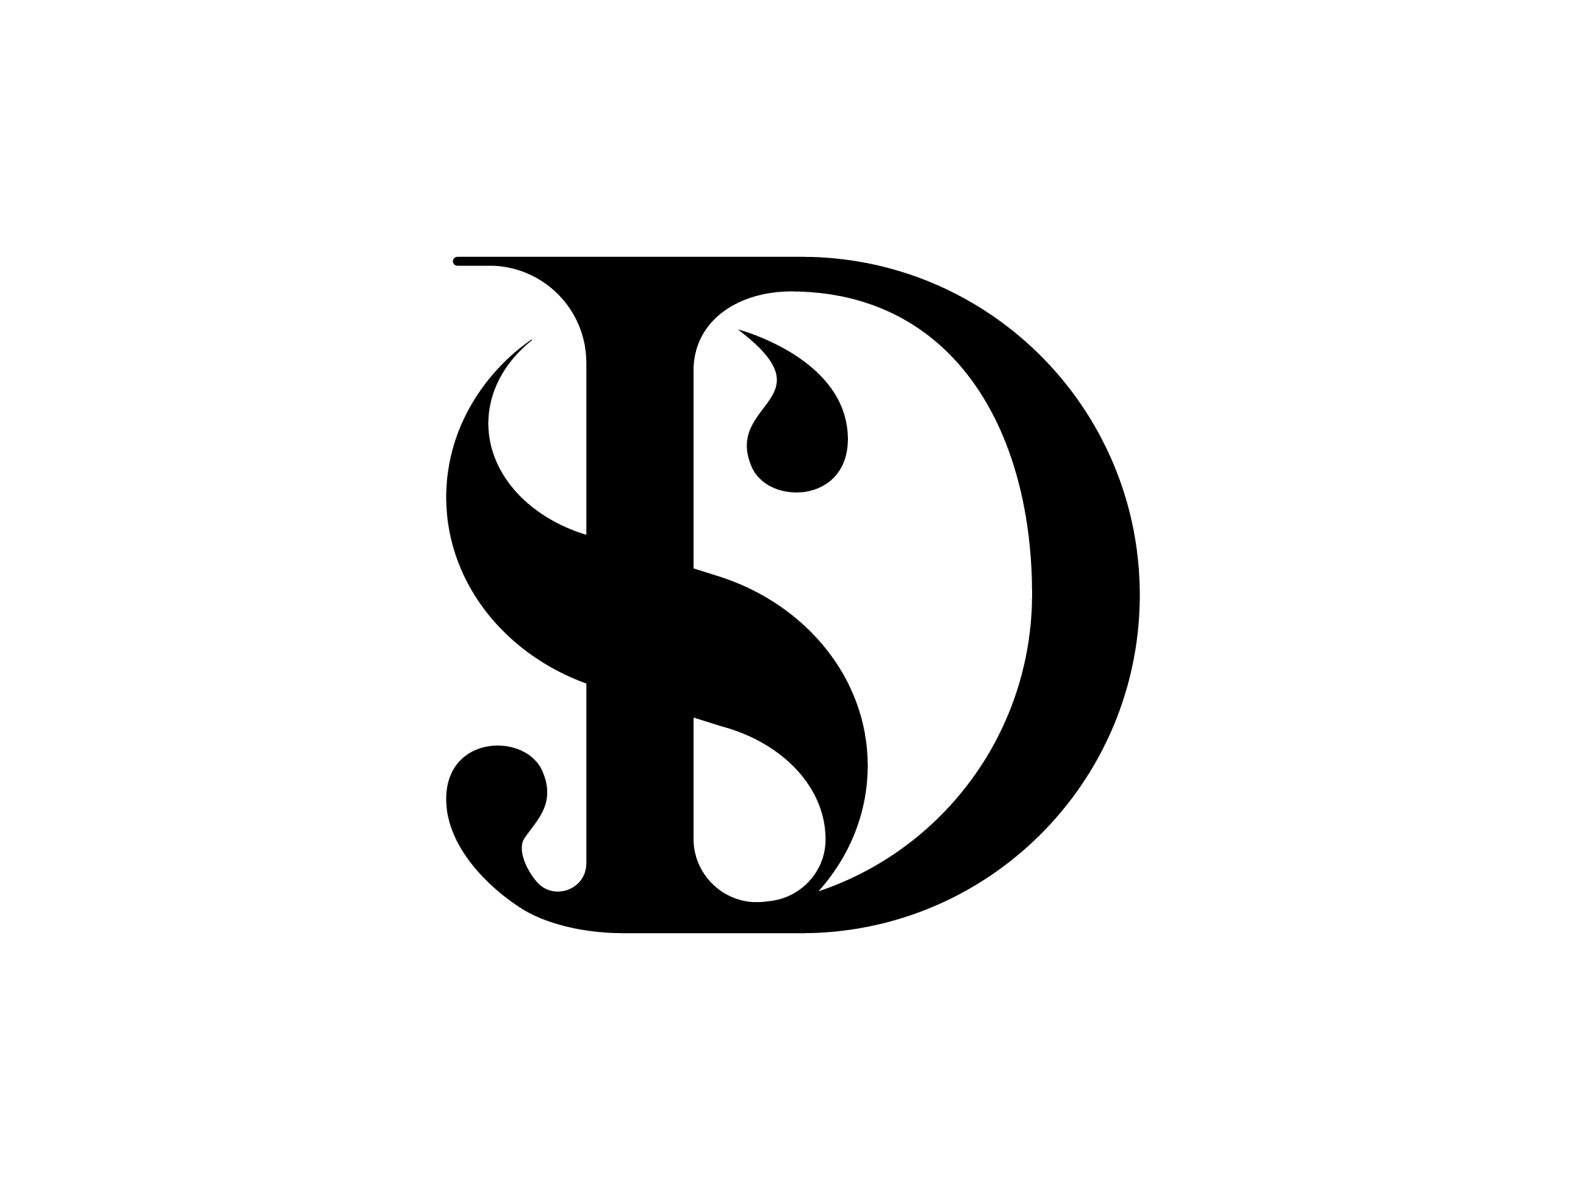 Letter DS by Muzulan on Dribbble